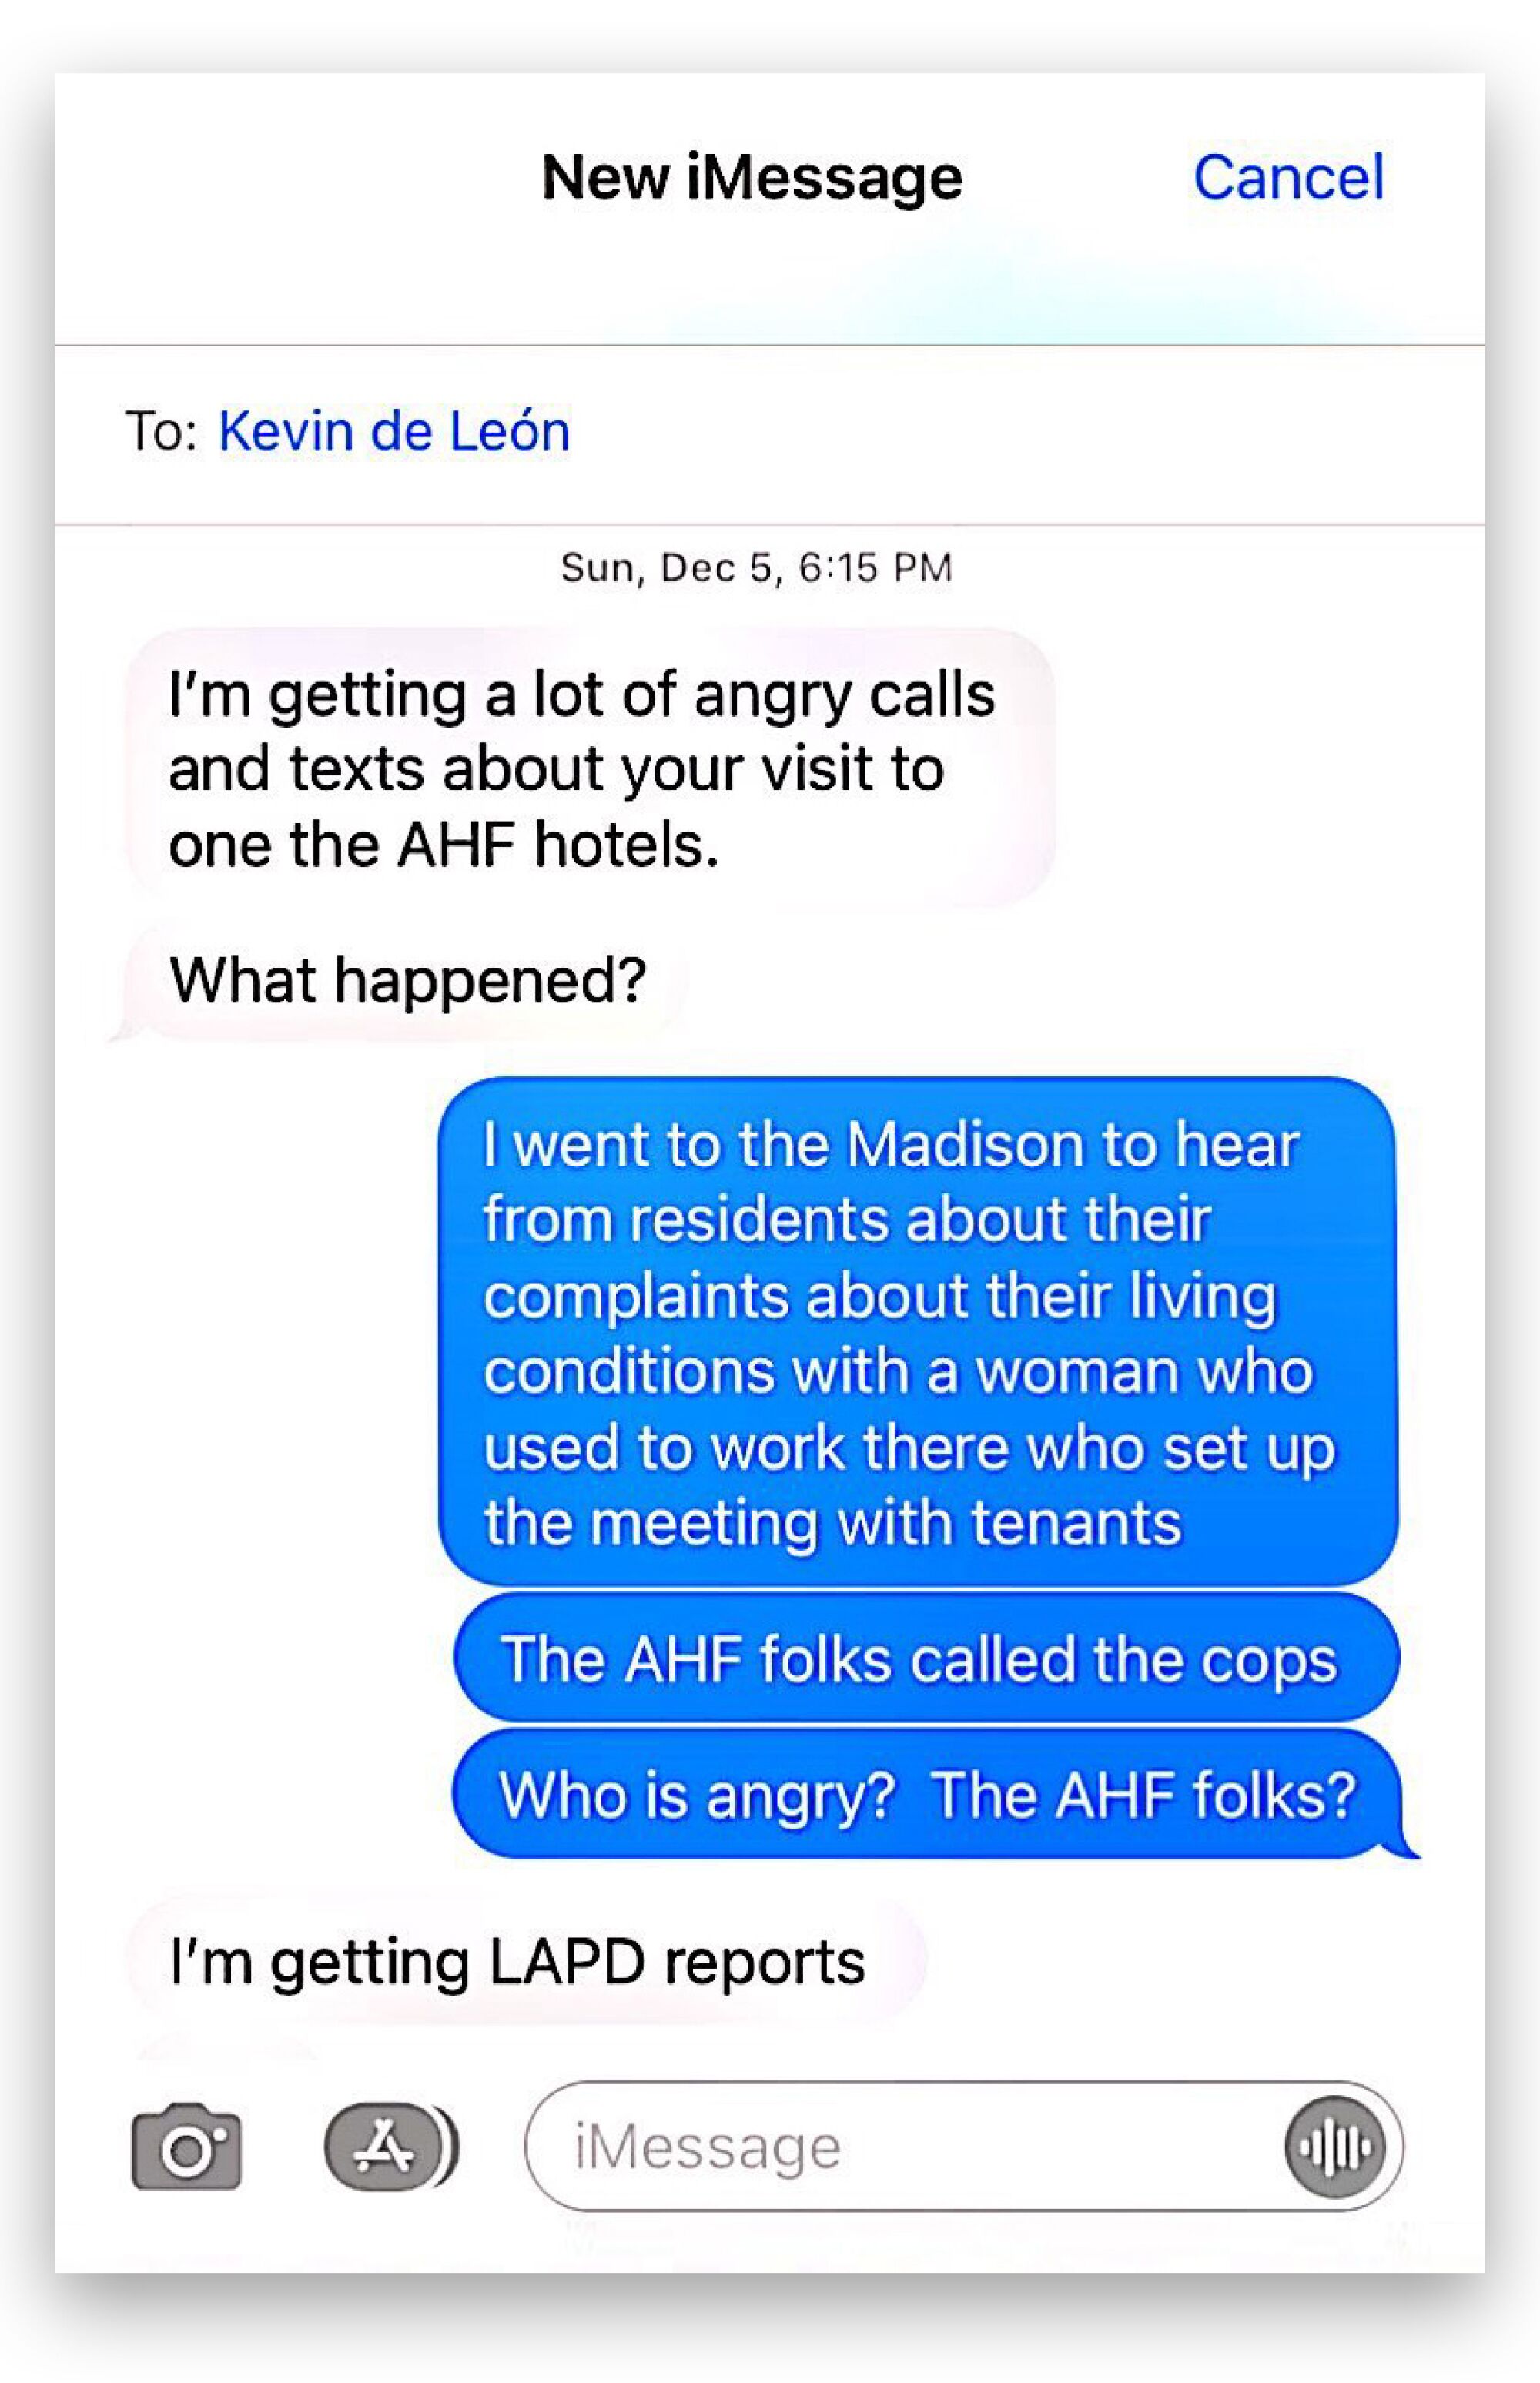 Text message screenshots. "I'm getting a lot of angry calls and texts." "Who is angry. AHF folks?" "I'm getting LAPD reports"